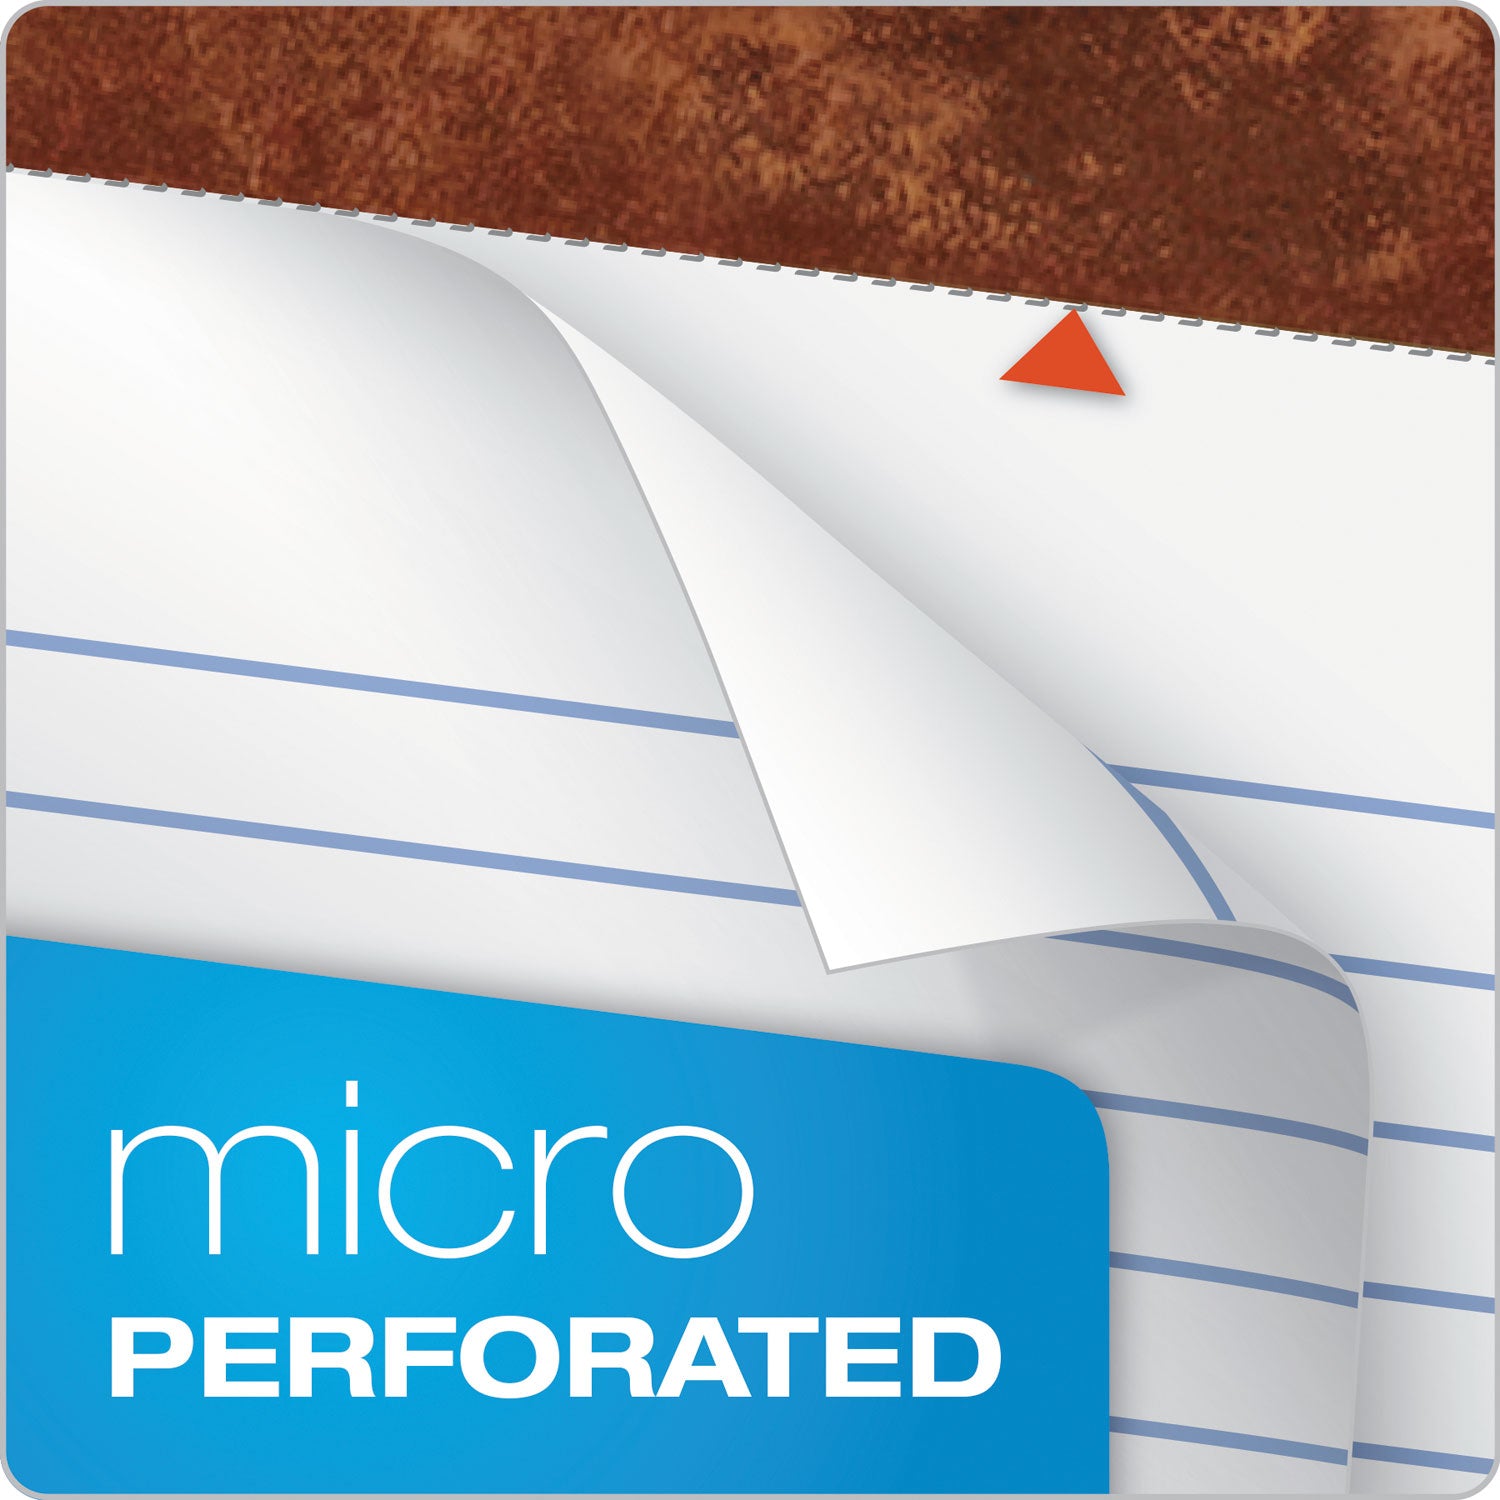 The Legal Pad" Ruled Perforated Pads, Narrow Rule, 50 White 5 x 8 Sheets, Dozen - 